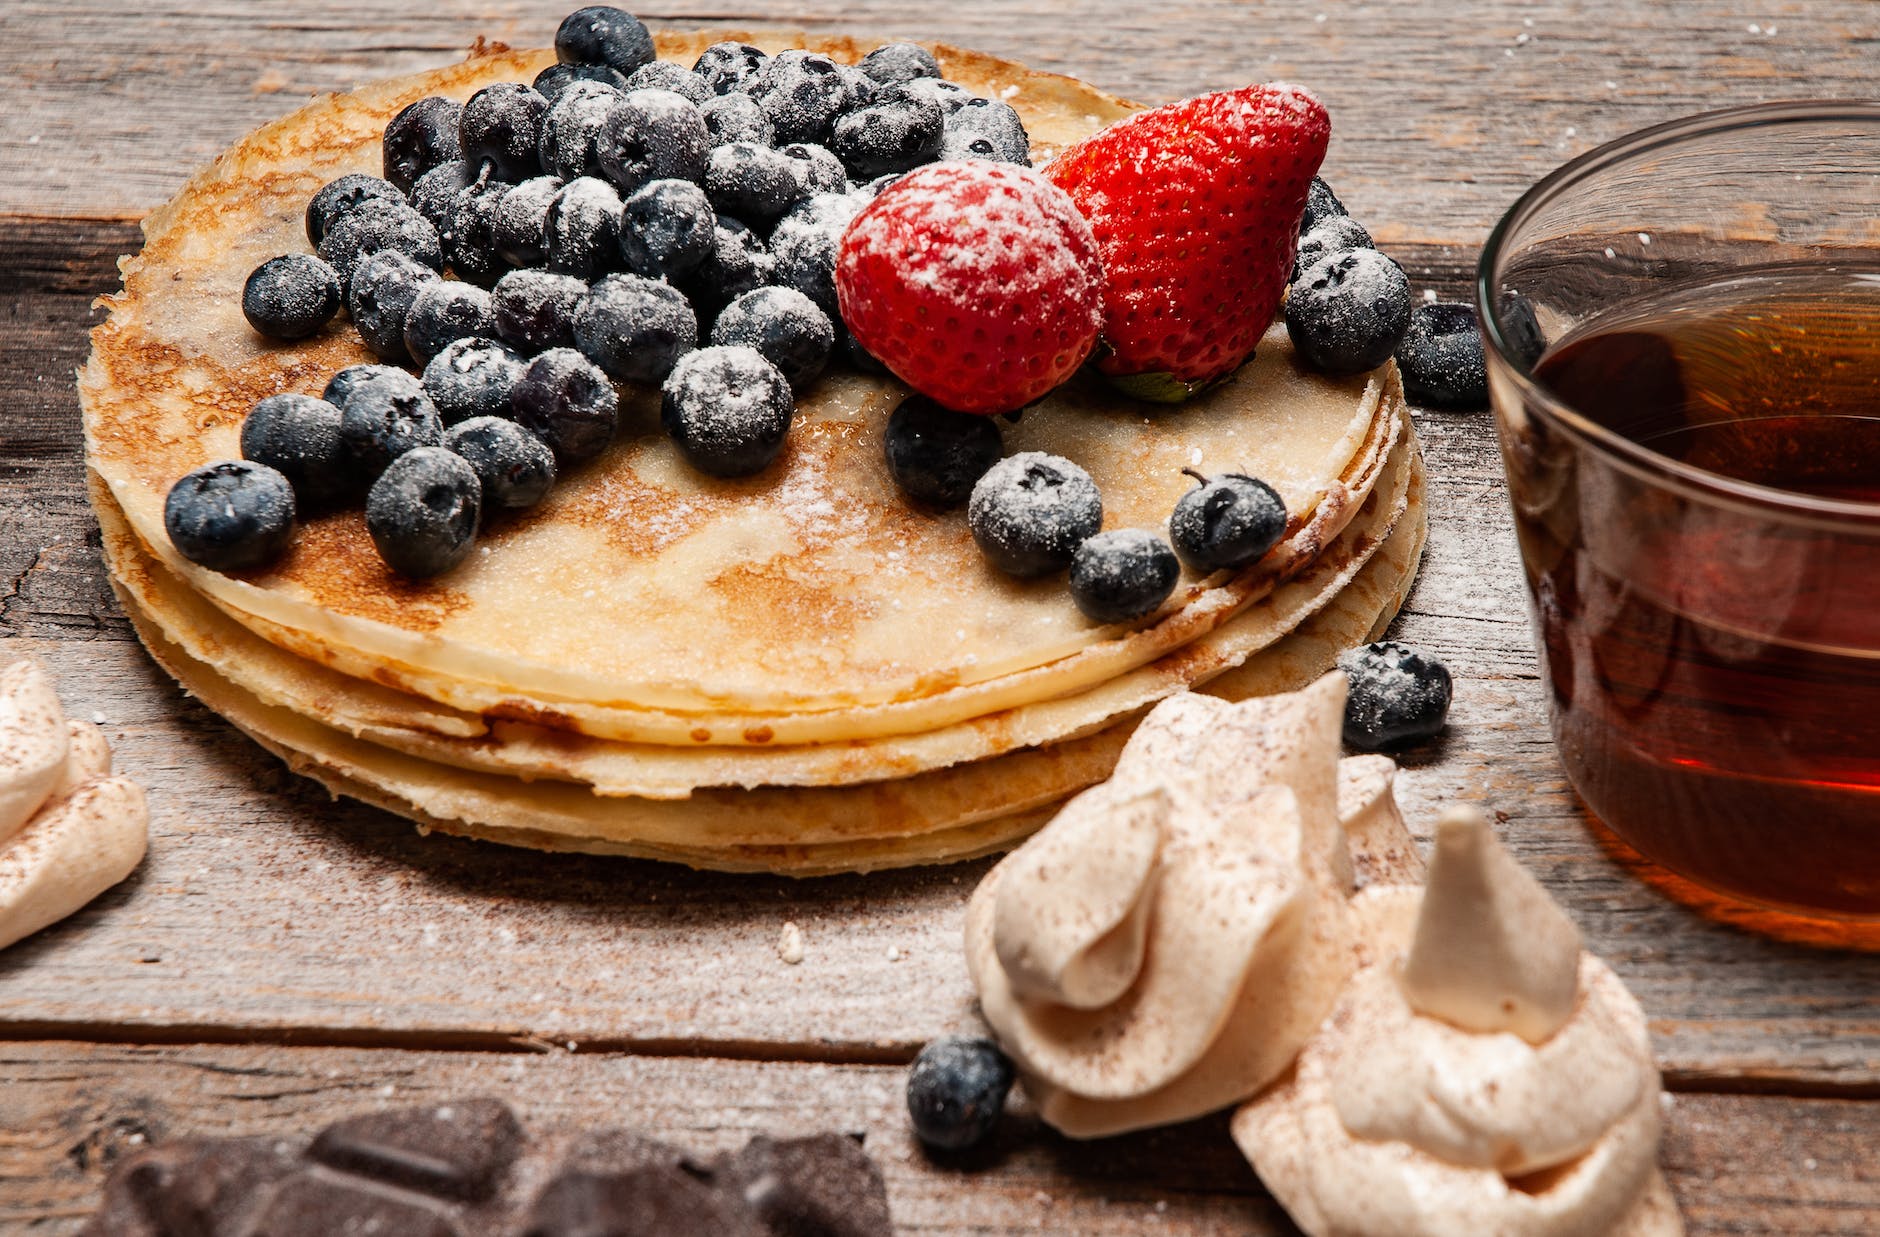 pancakes with strawberries and blueberries on top Photo by Dmytro on Pexels.com